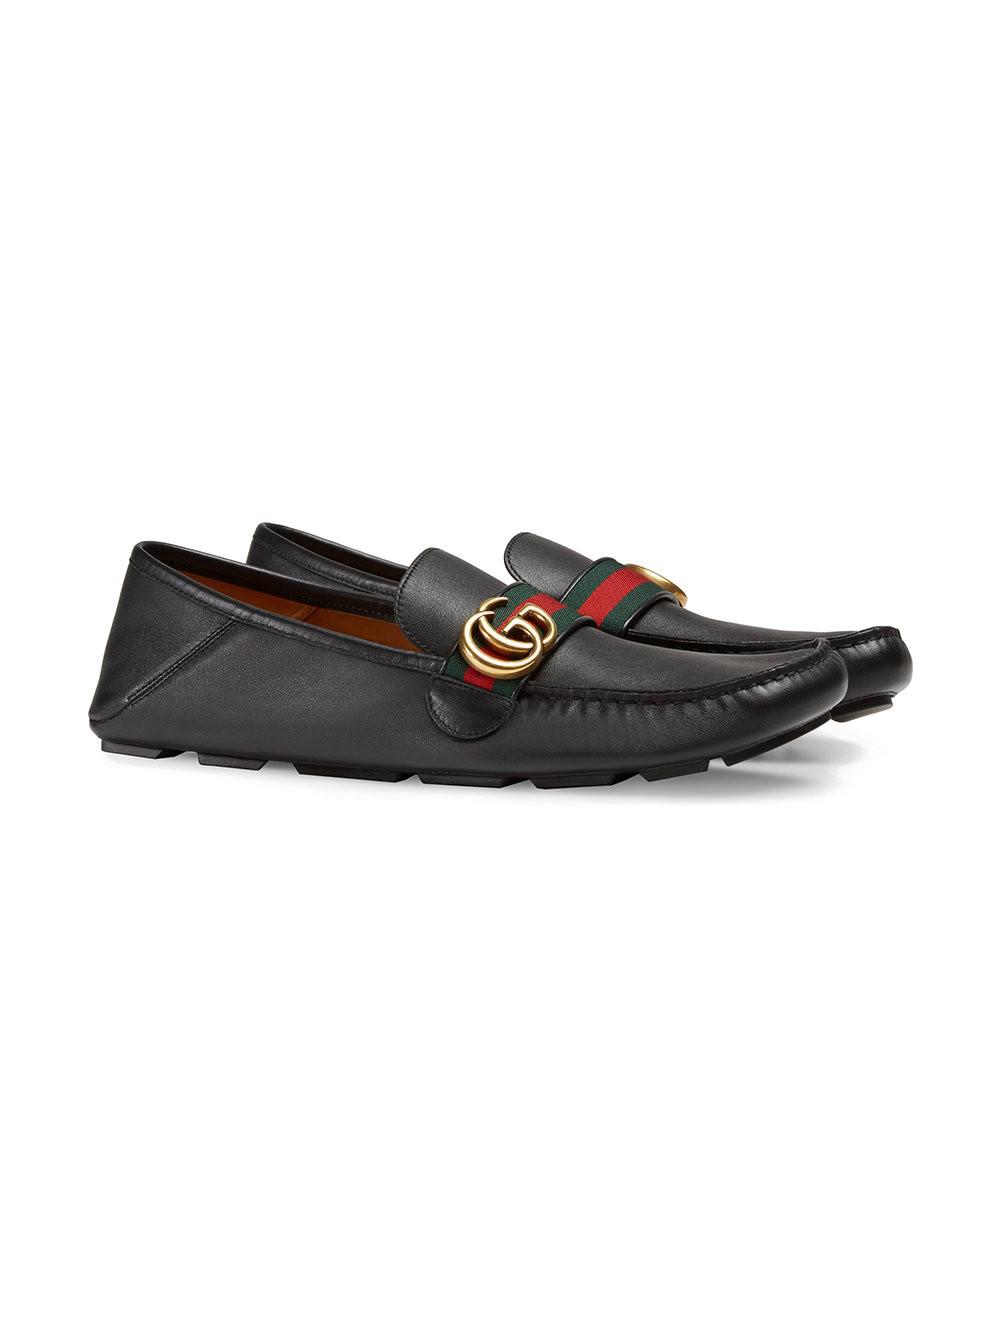 mens gucci driving loafers